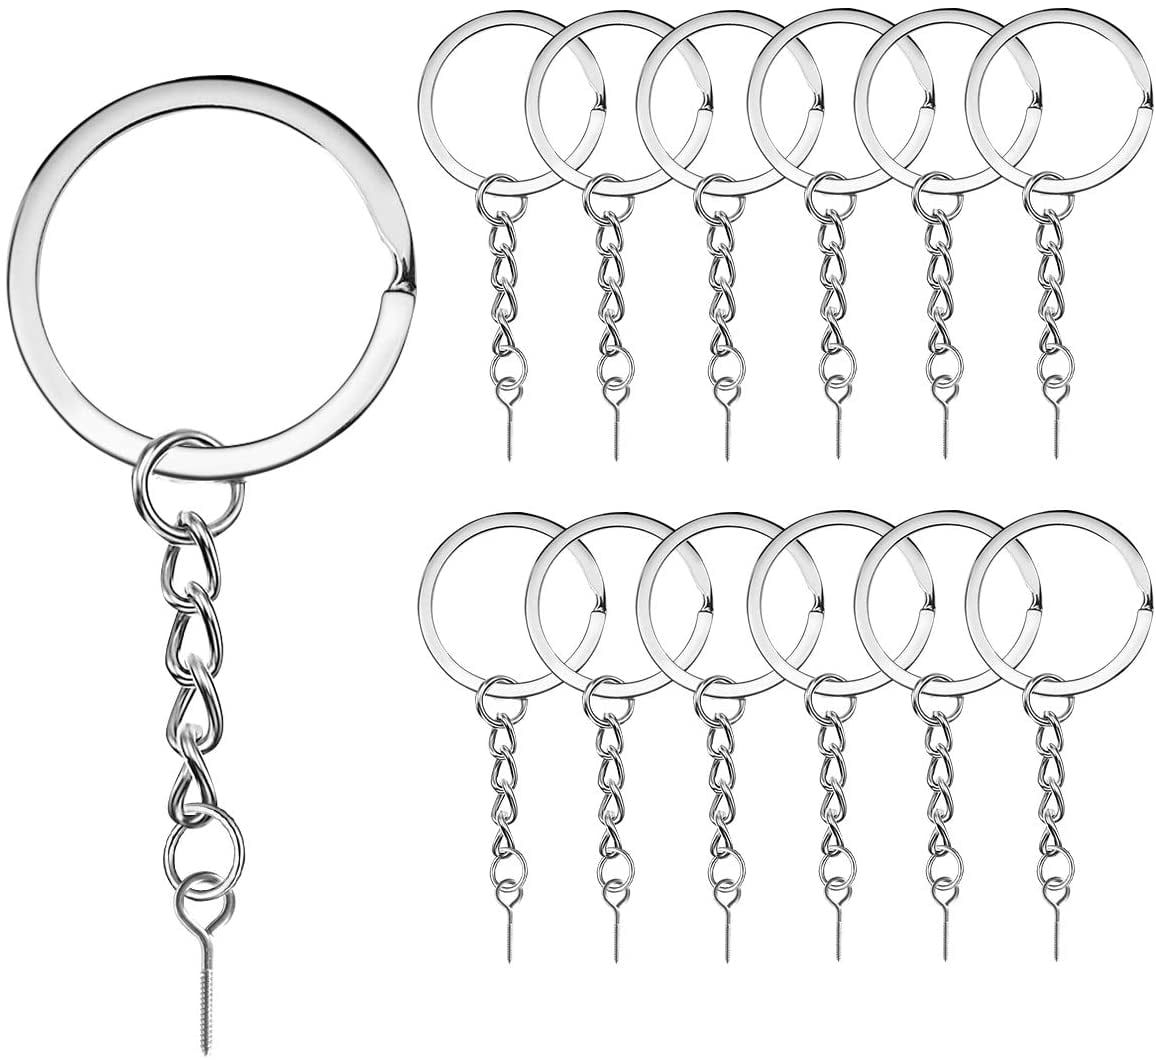 Rustark 300 Pcs Black Key Chain Rings Kit Including 100 Pcs Keychain Rings with Chain and 100 Pcs Open Jump Ring Come with 100 Pcs Screw Eye Pins for Jewelry Making 20mm 25mm 30mm 35mm 